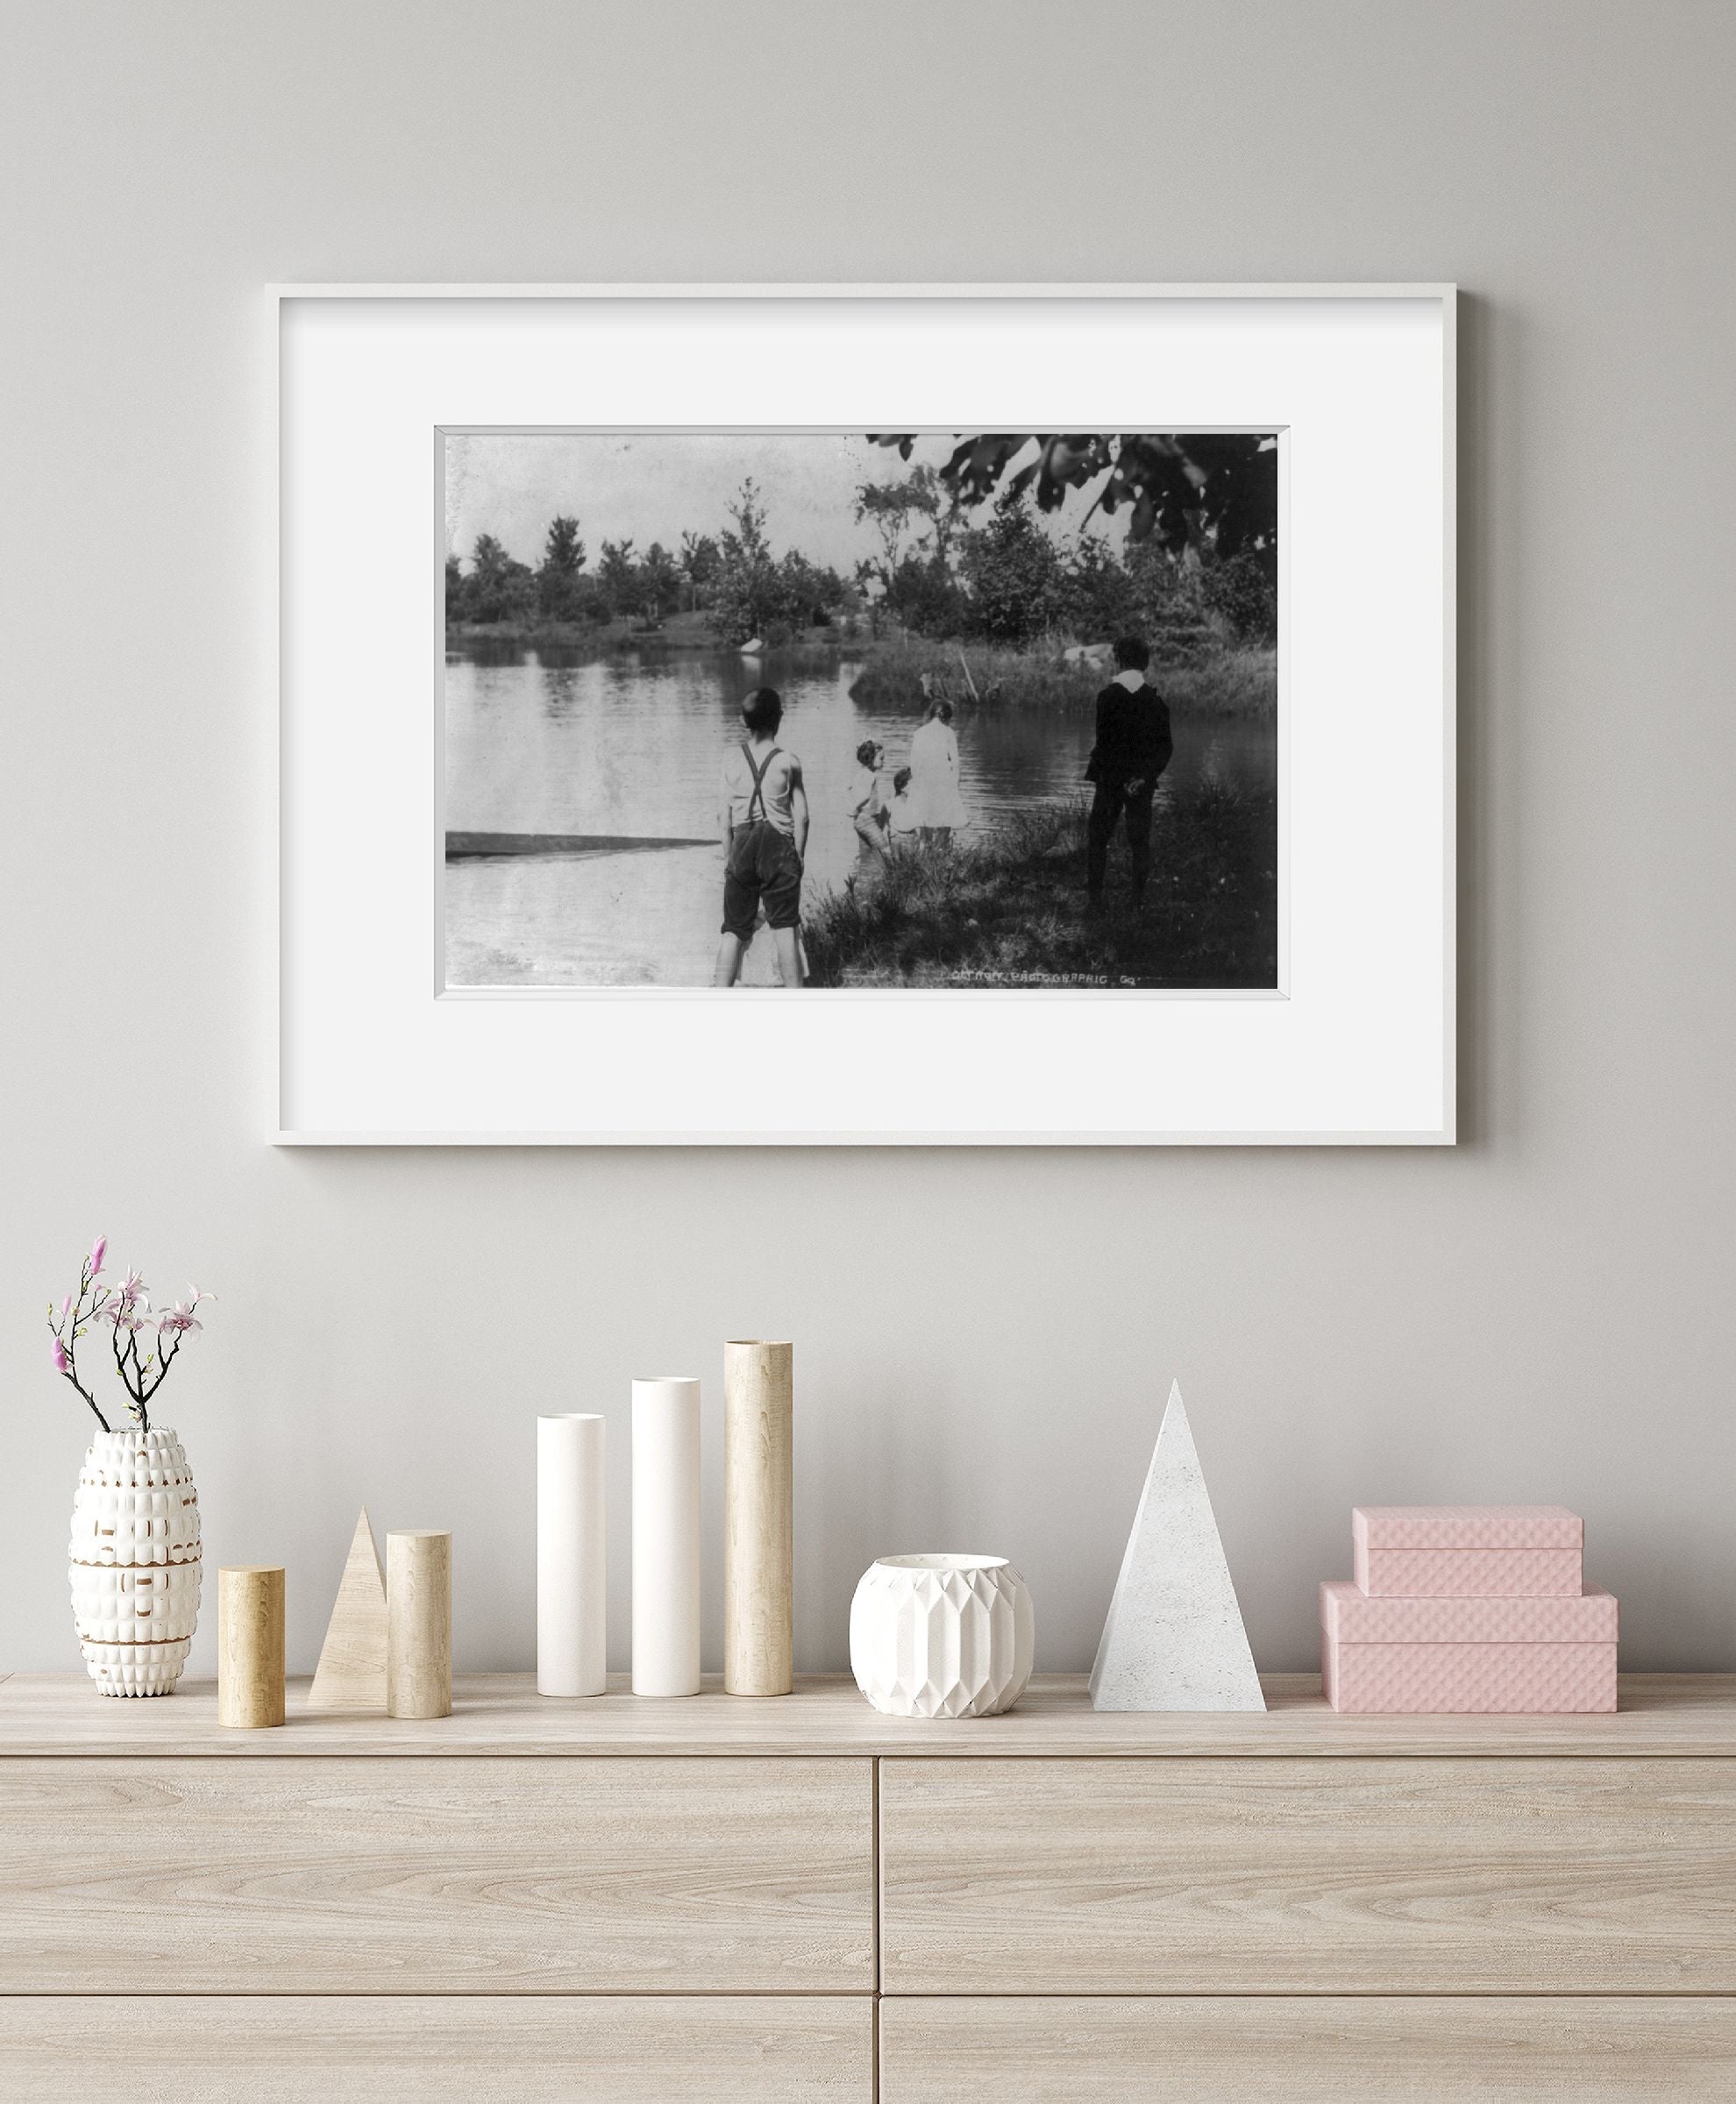 Photograph of Children wading at edge of lake